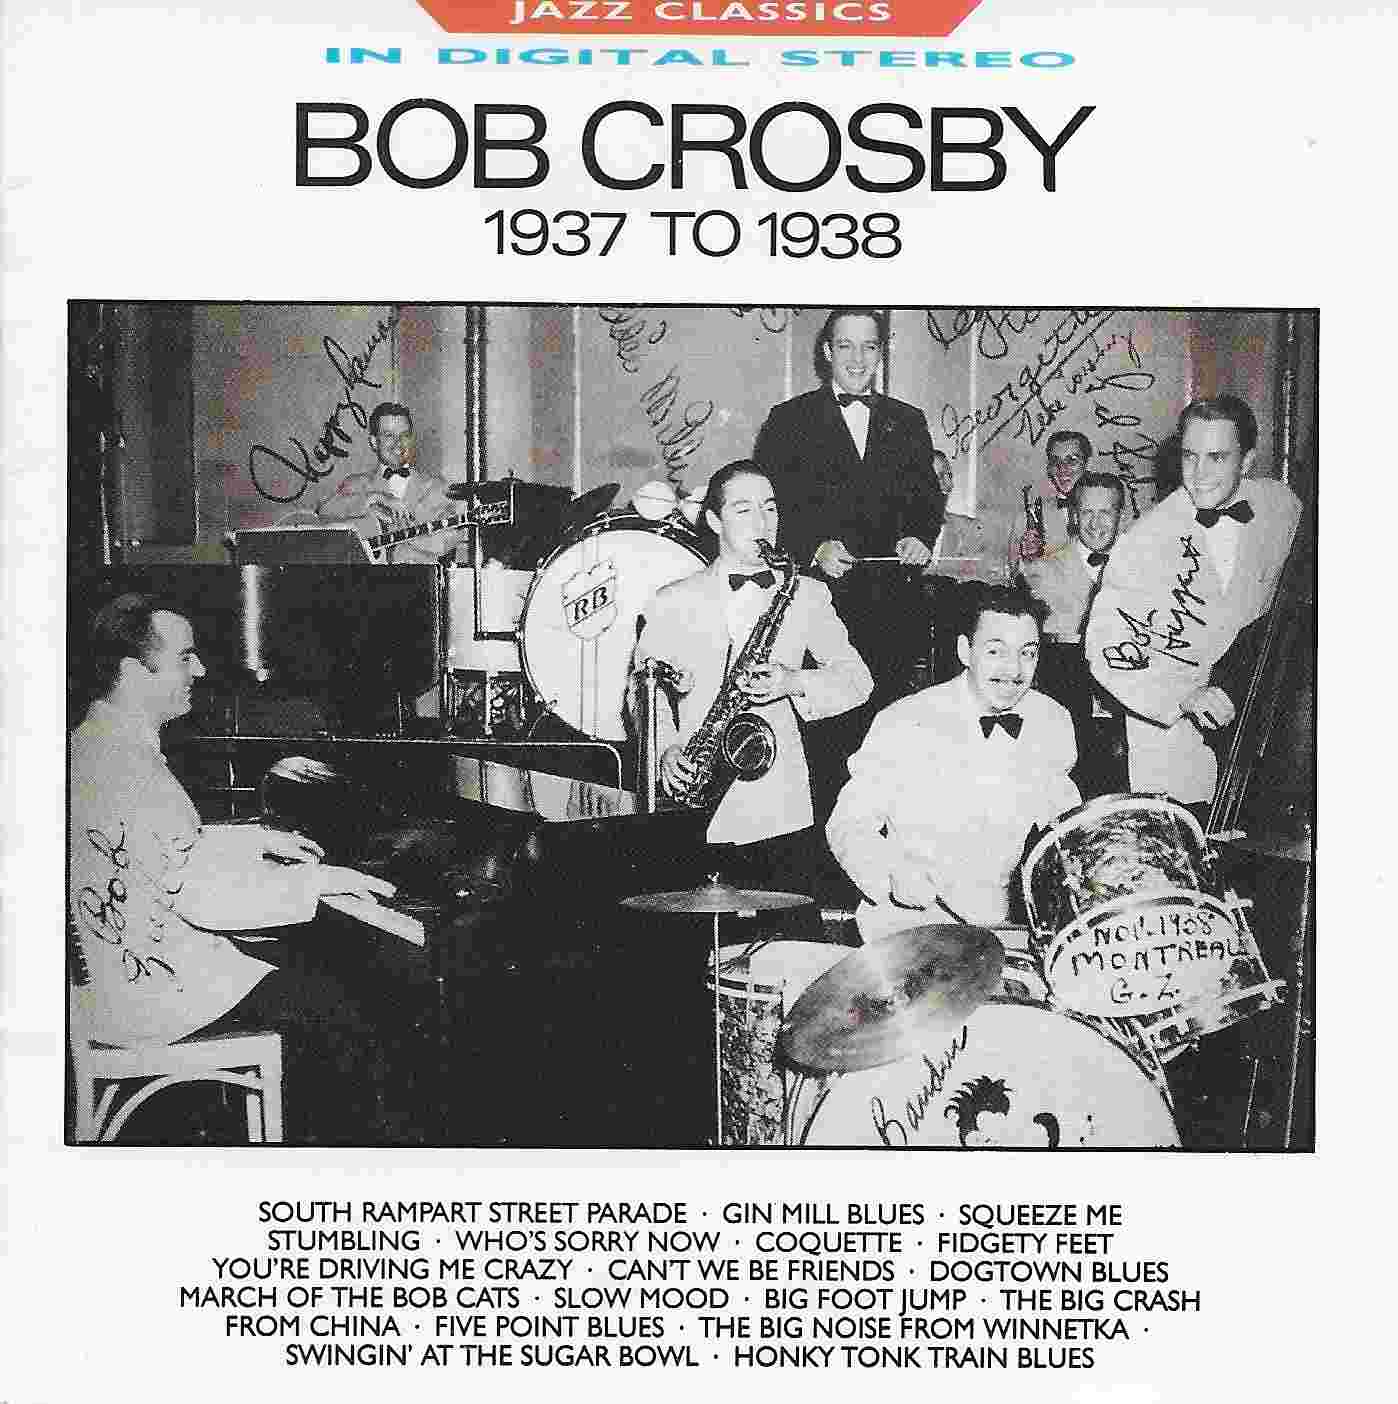 Picture of BBCCD688 Jazz classics - Bob Crosby by artist Bob Crosby from the BBC cds - Records and Tapes library